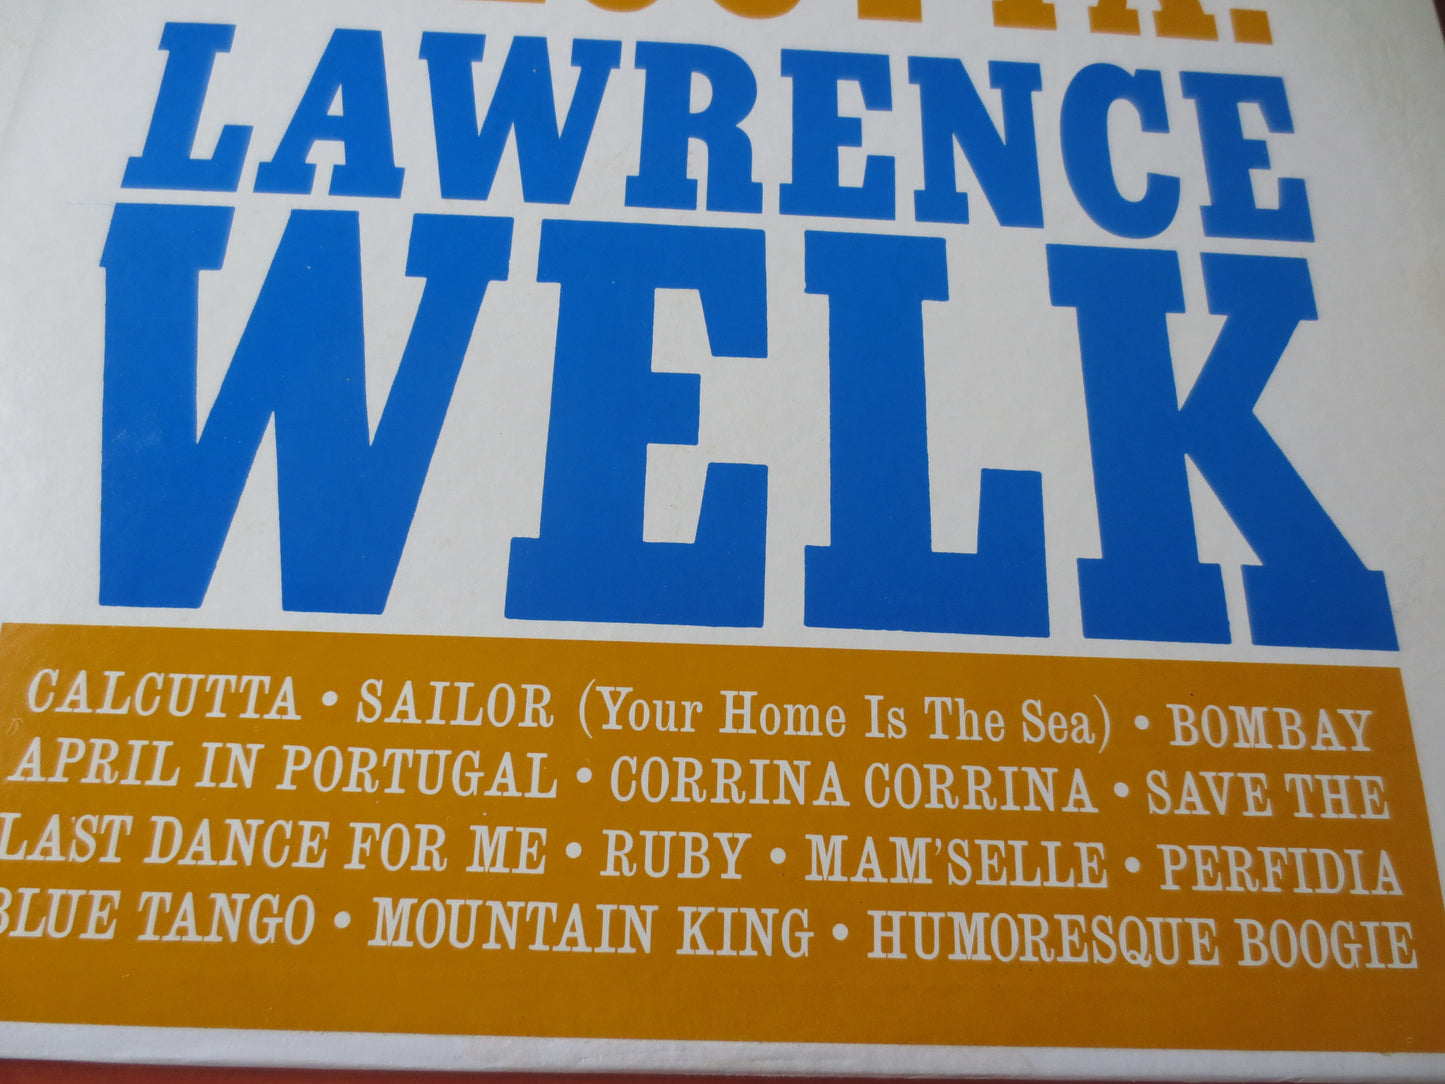 LAWRENCE WELK, CALCUTTA, Lawrence Welk Albums, Lawrence Welk Record, Vintage Vinyl, Vinyl Records, Vinyl Lps, 1961 Records